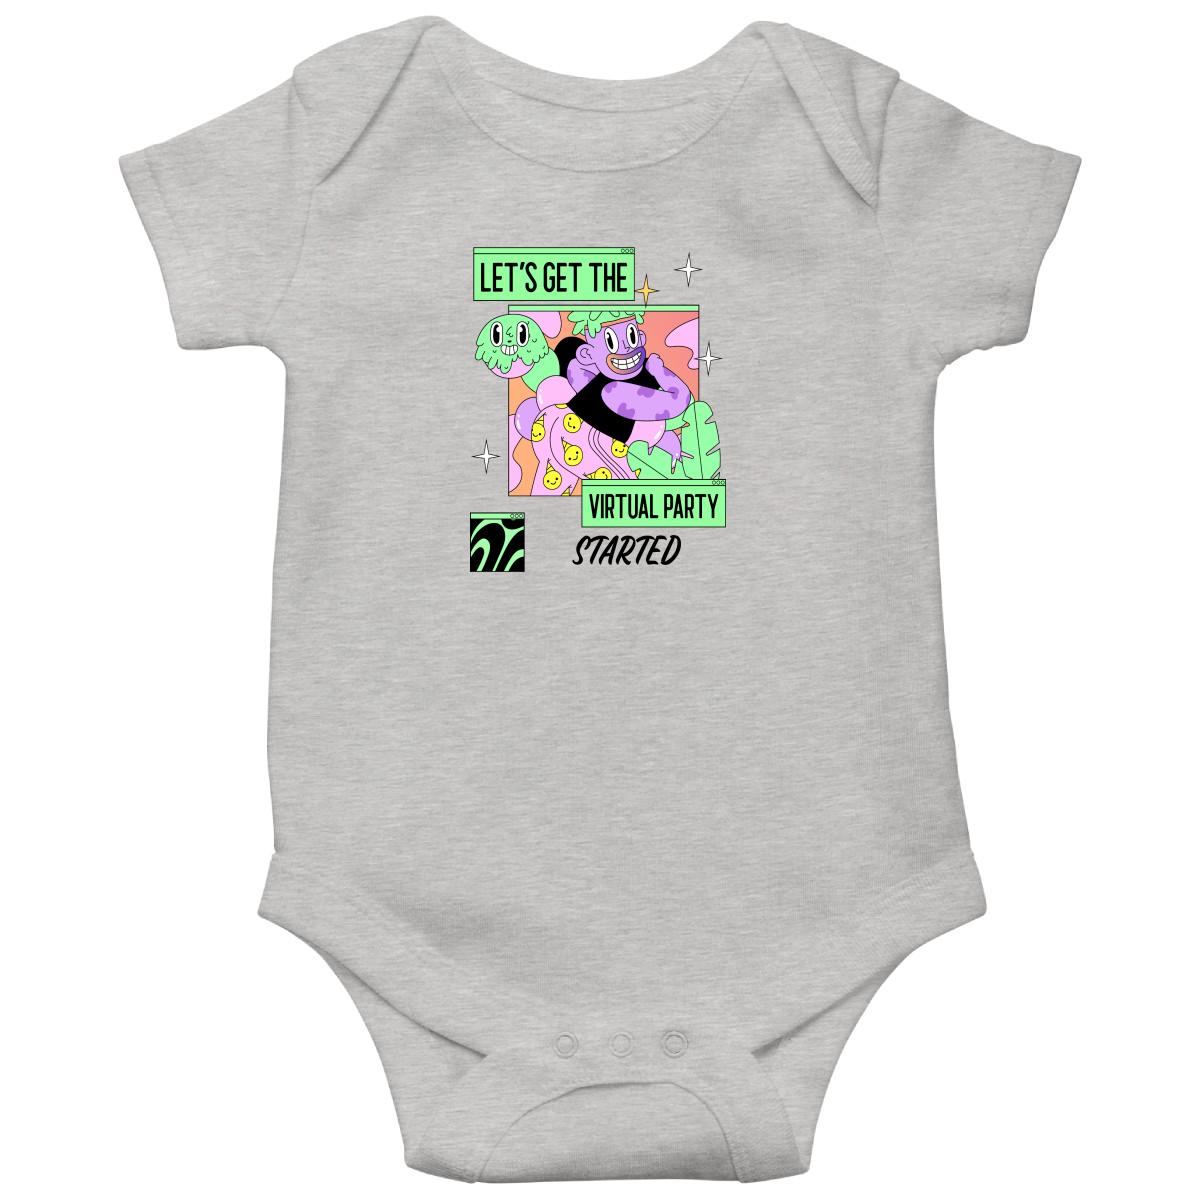 Let's get the virtual party started Baby Bodysuits | Gray